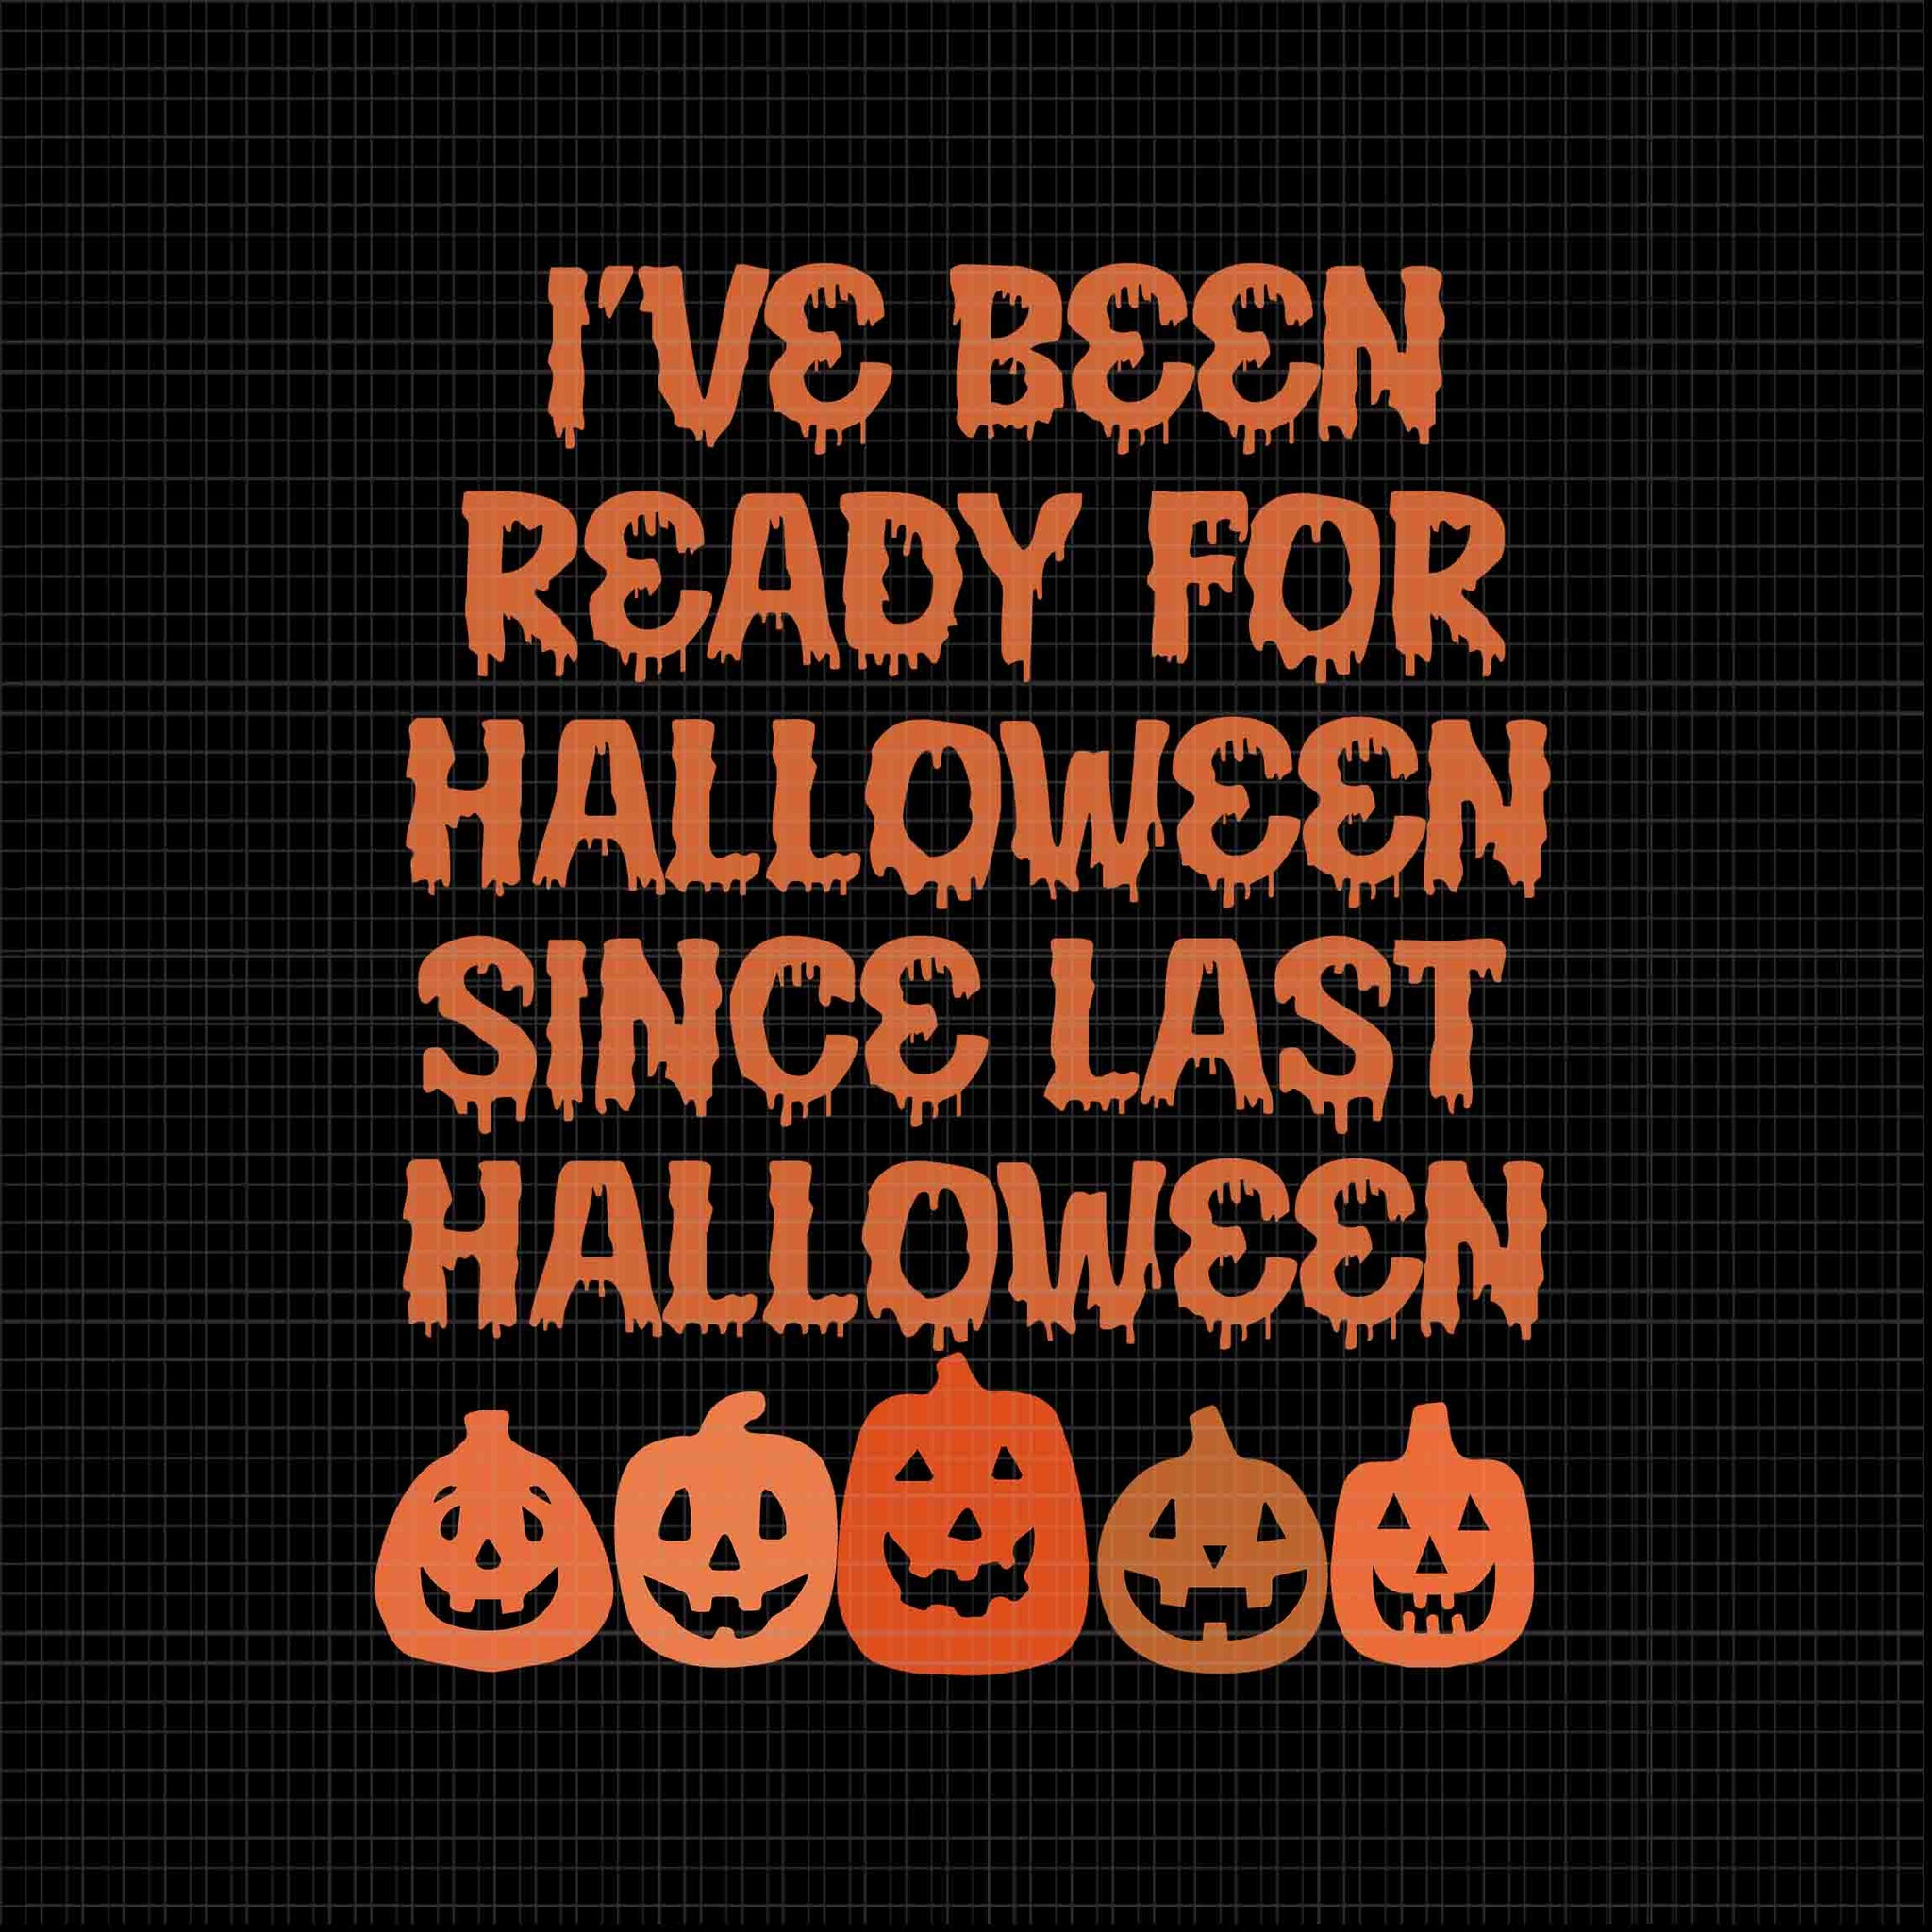 I've Been Ready For Halloween Since Last Halloween Svg, Halloween Svg, Pumpkin Svg, Halloween Pumpkin Svg, Funny Pumpkin